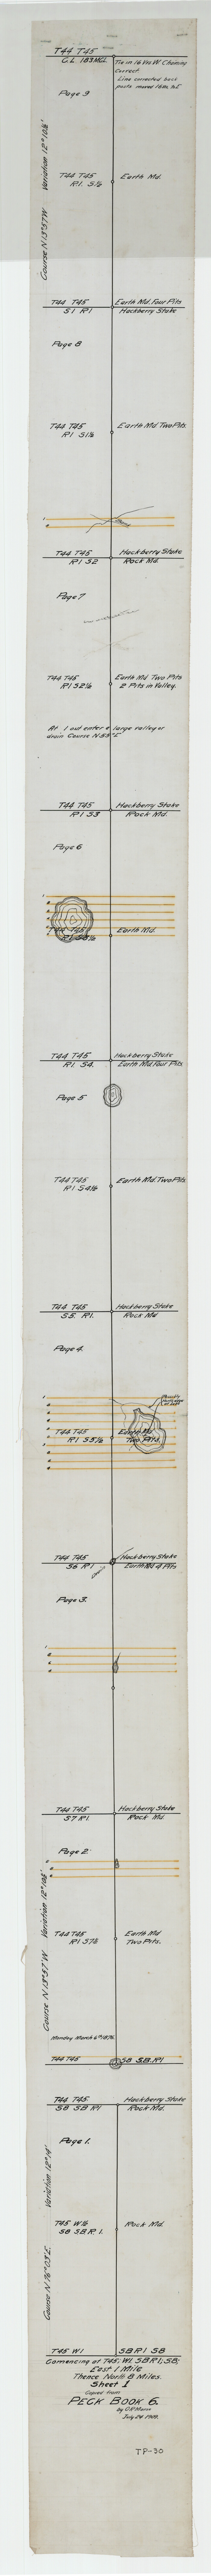 93169, Sheet 1 copied from Peck Book 6 [Strip Map showing T. & P. connecting lines], Twichell Survey Records